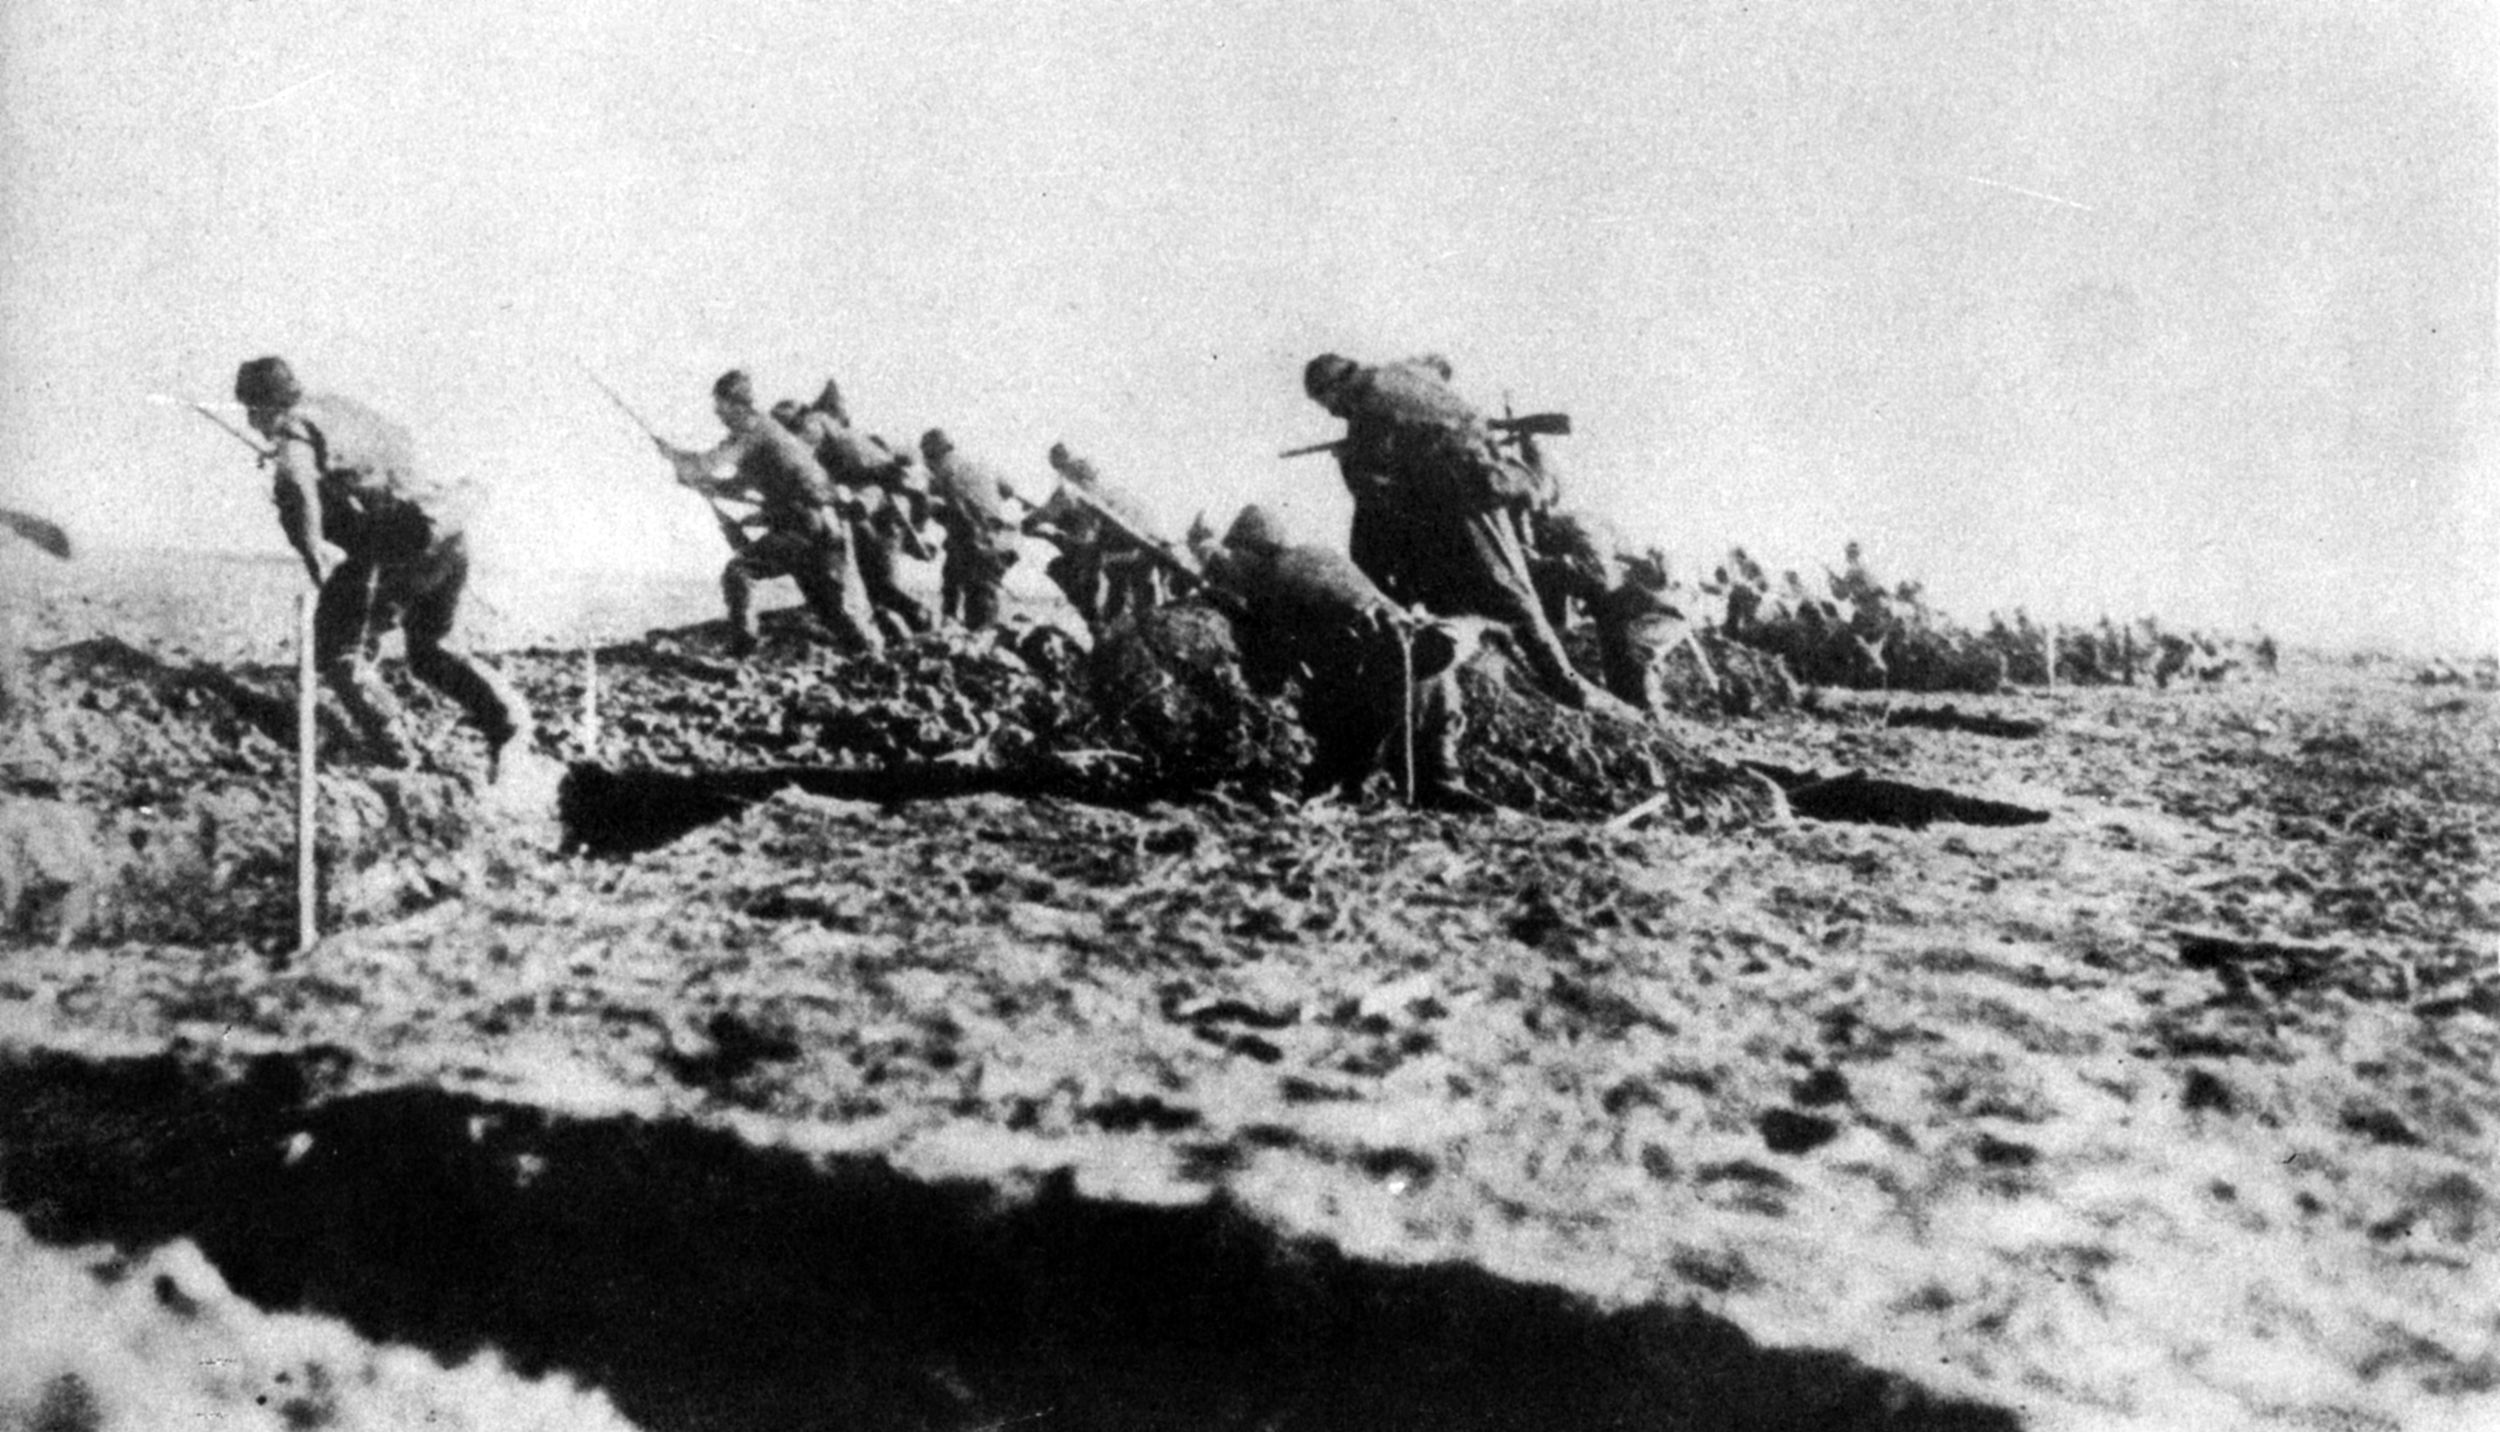 Turkish infantry, fighting on their home soil, spring from the trenches to counterattack British and ANZAC forces at Gallipoli. Some 218,000 Turkish casualties were suffered during the campaign, including 66,000 killed.